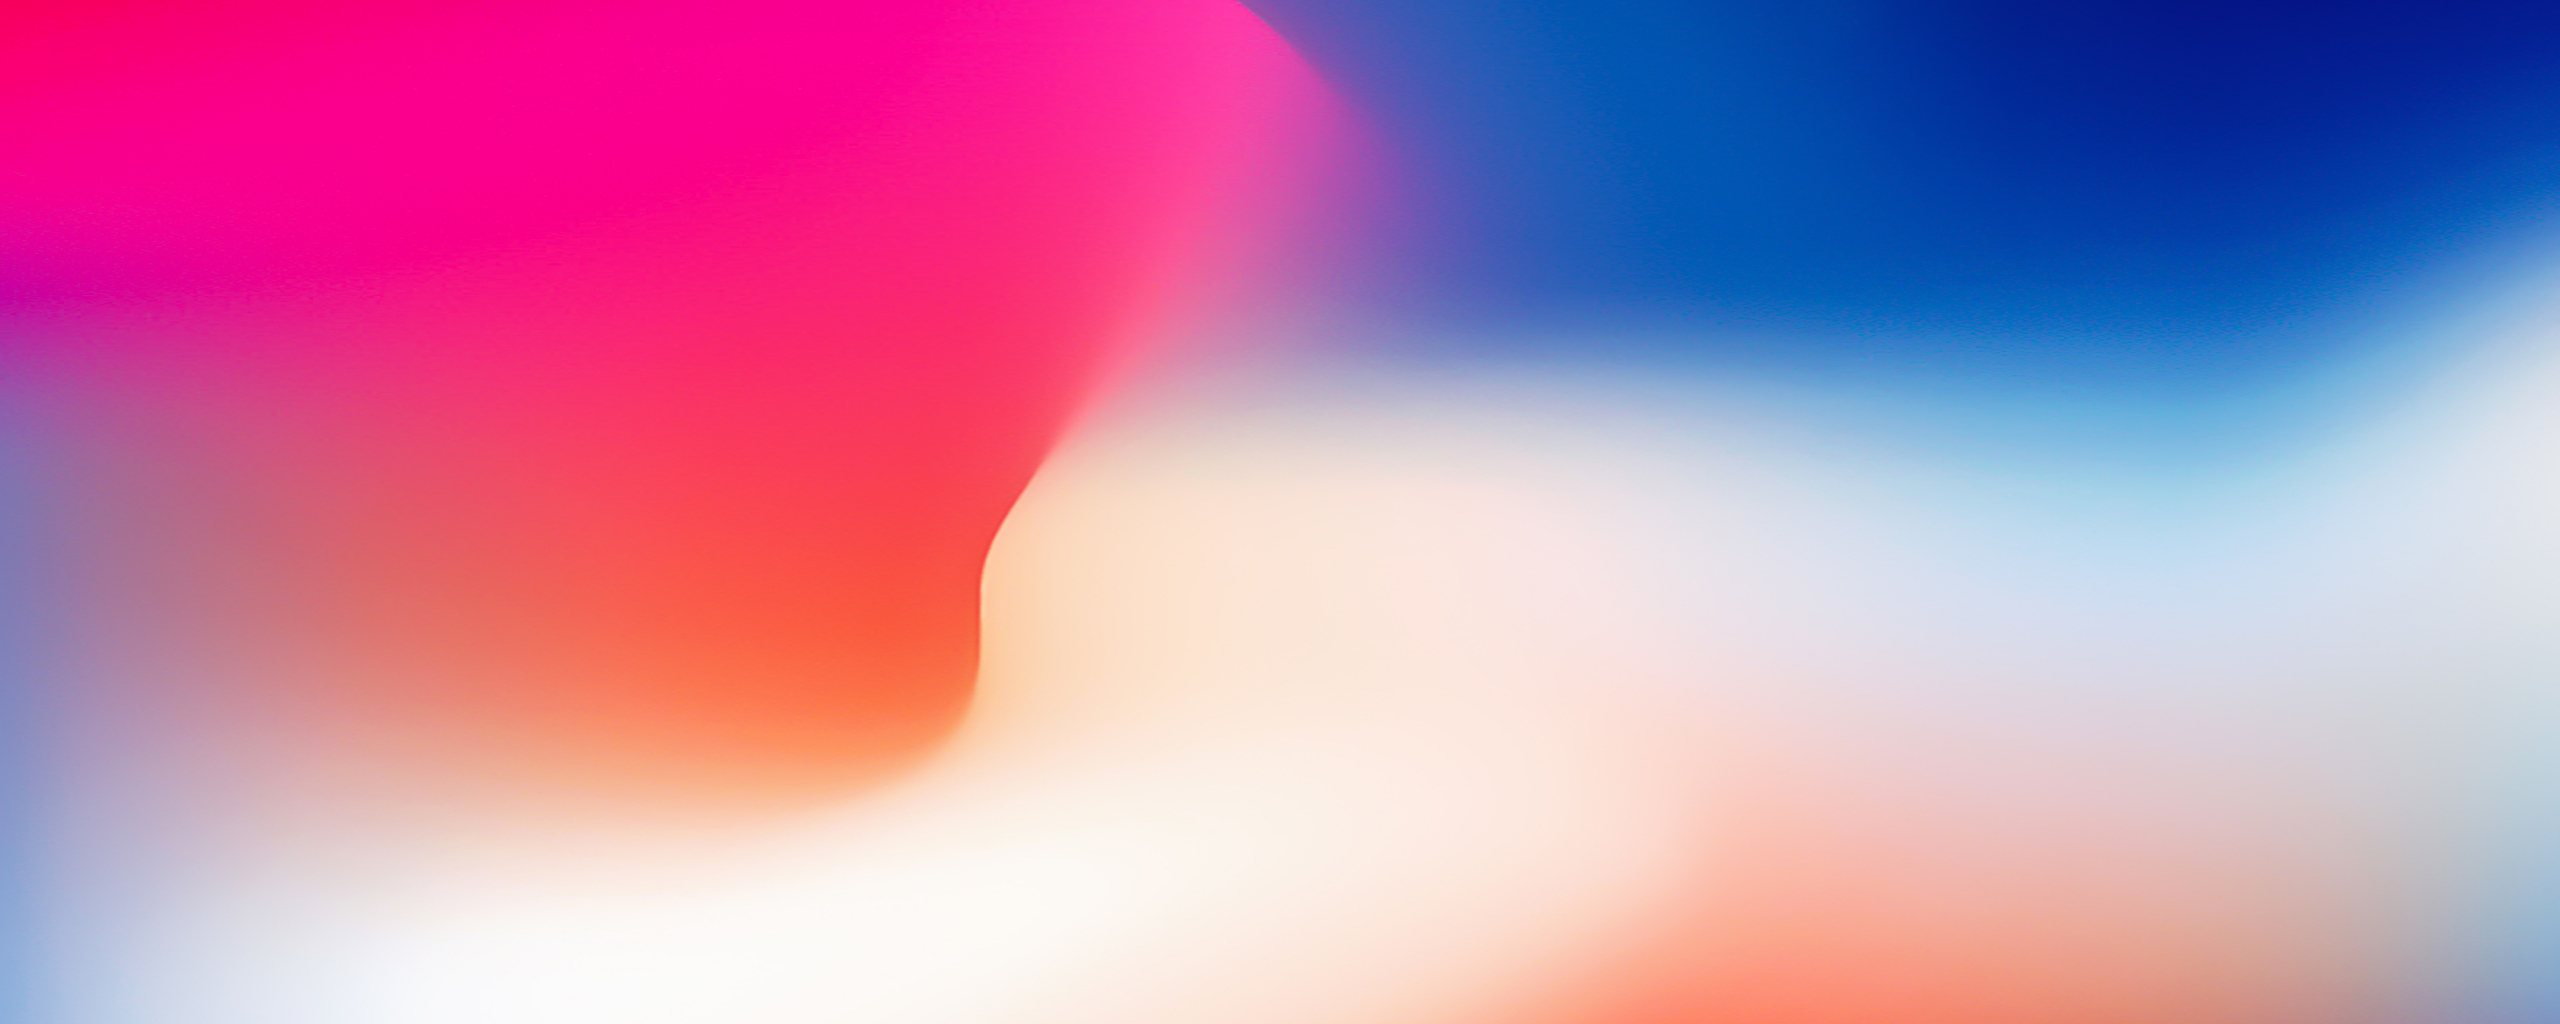 Download wallpaper 2560x1024 iphone x, stock, colorful gradient ...